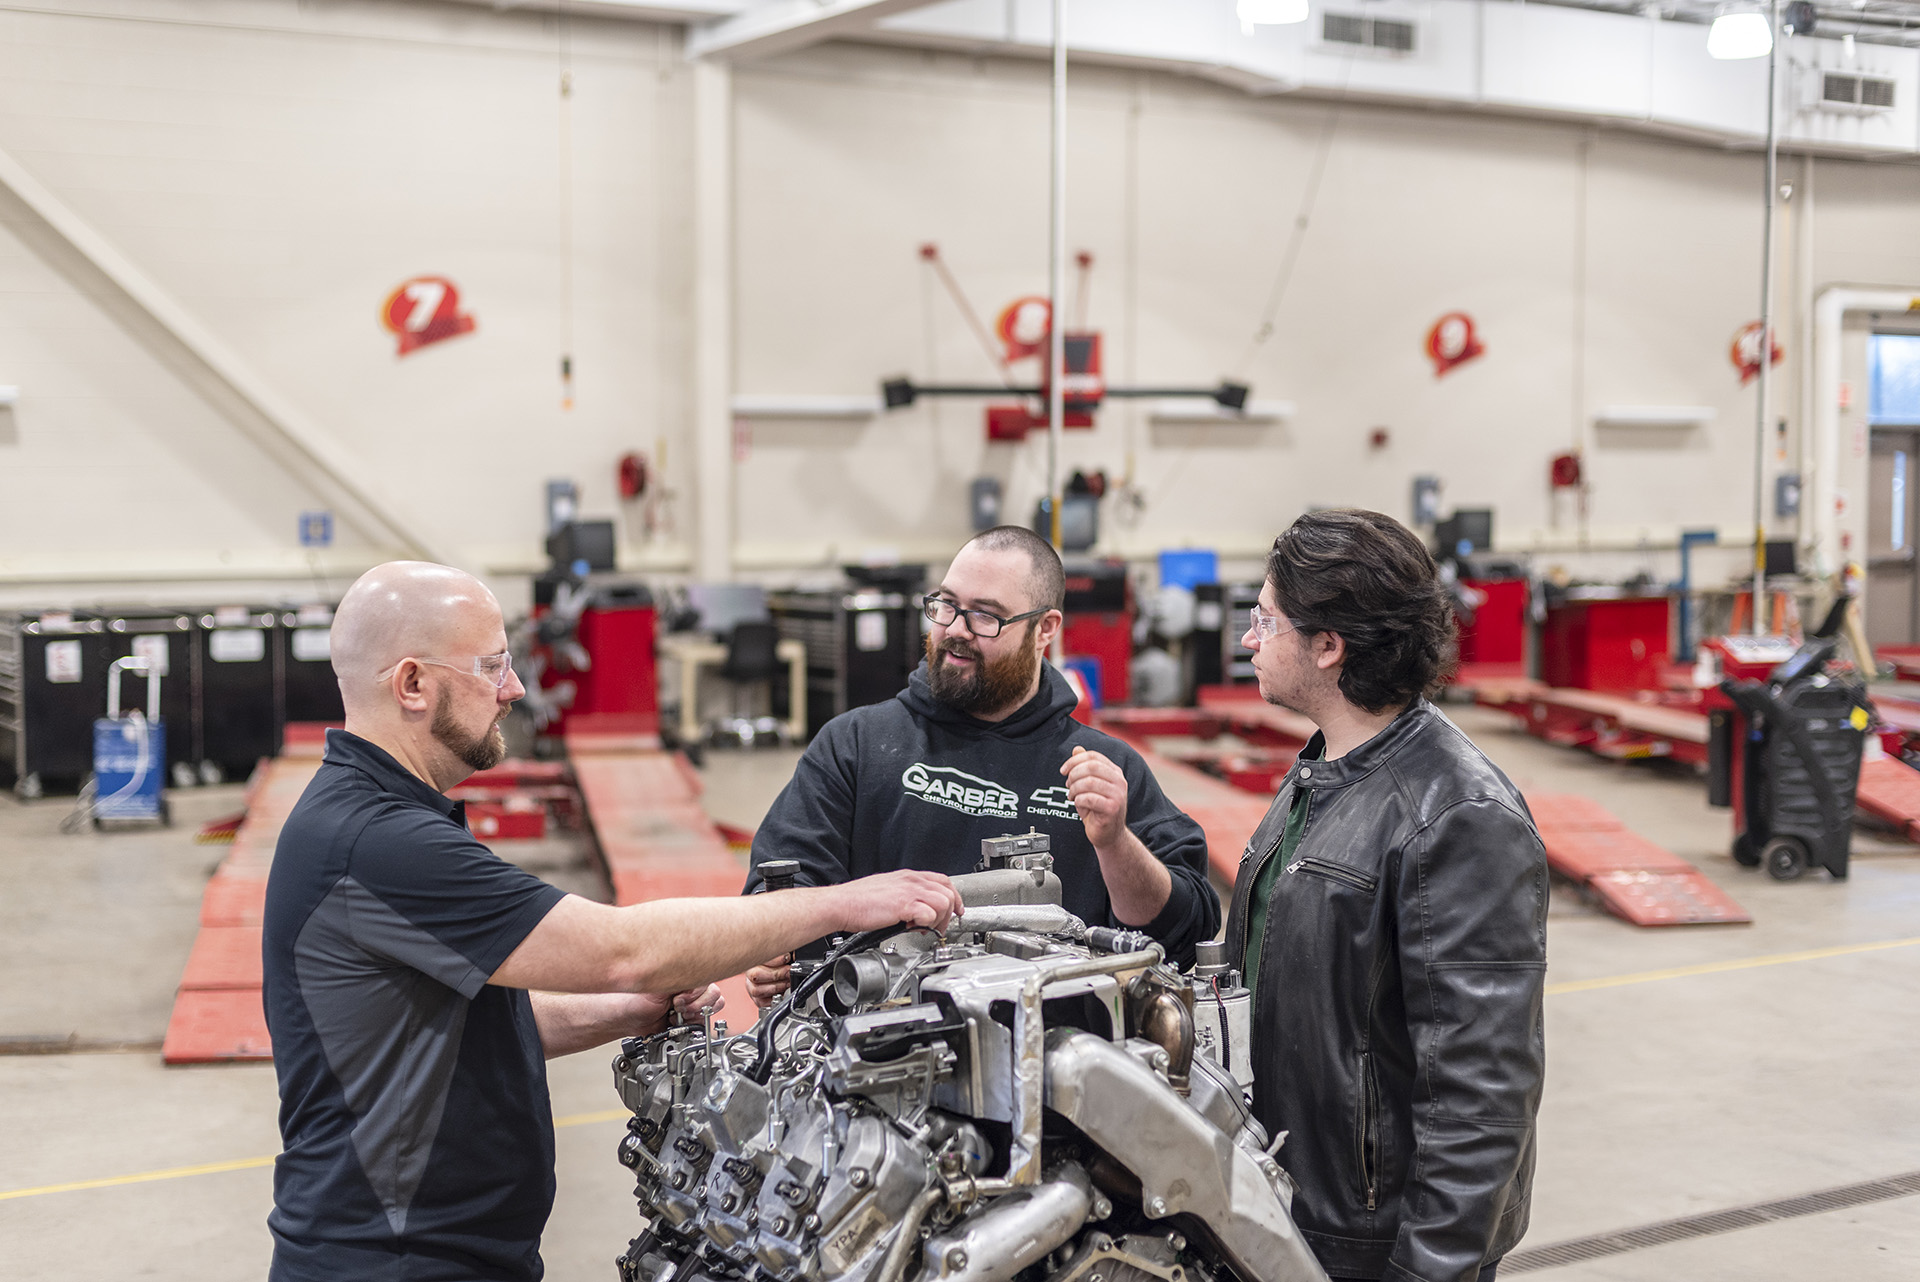 The automotive lab brings together students interested in automotive careers.